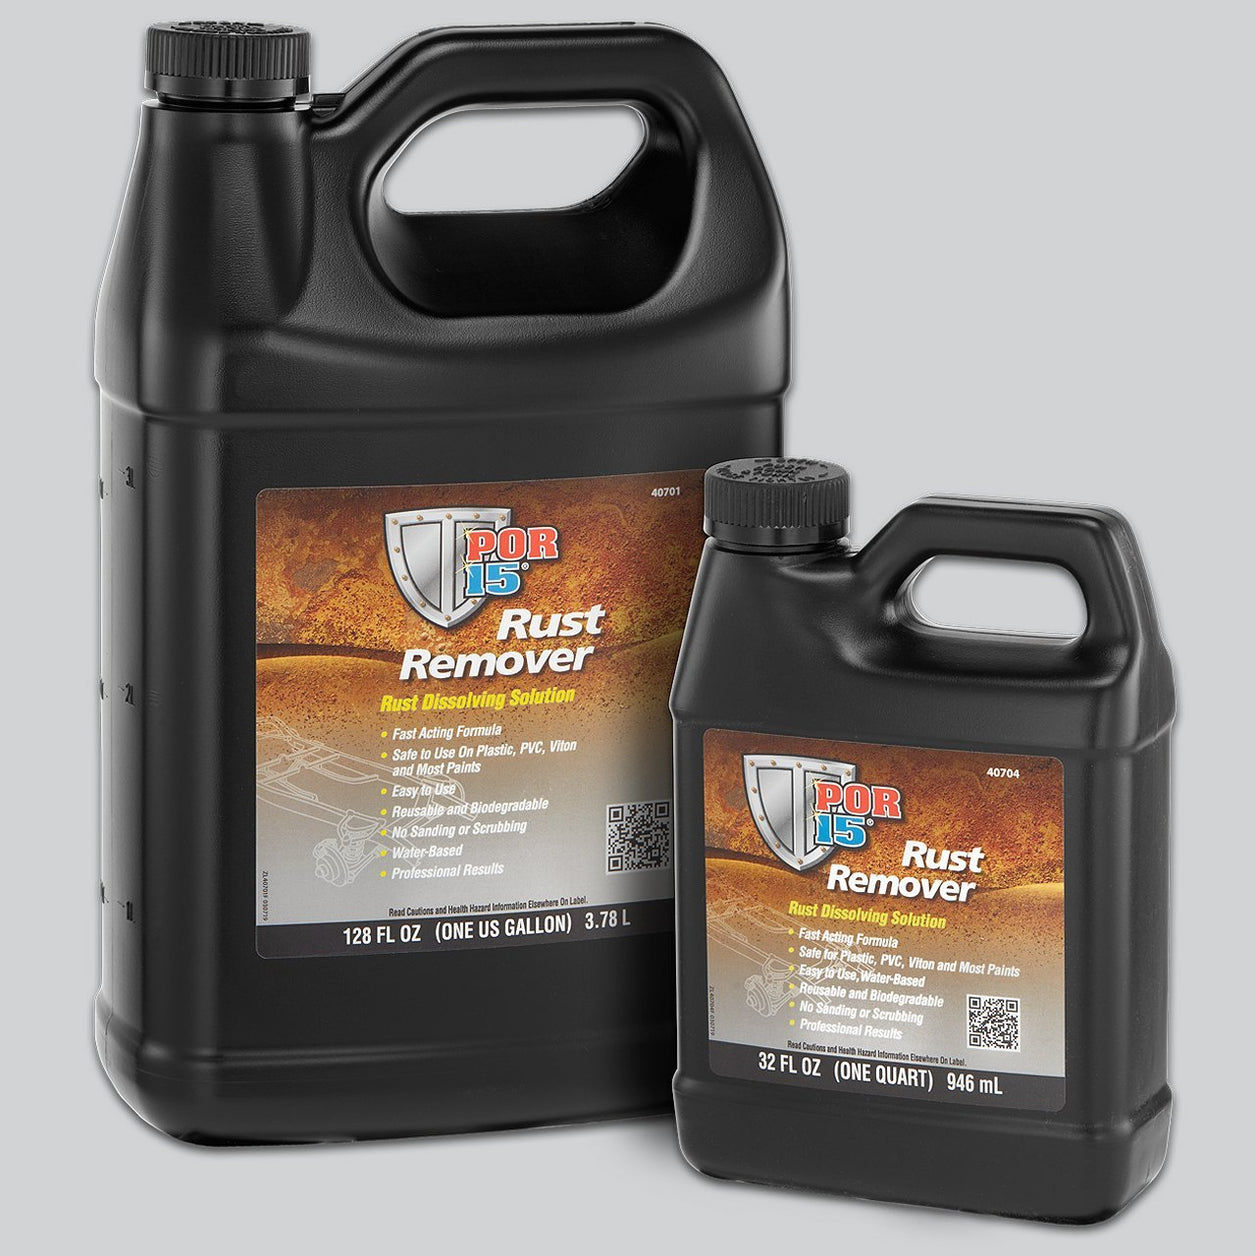 POR-15 Rust Preventive Coating, Clear Gloss, gallon, use as step 3 of the  3-step Rust Prevention System - #POR-15-CRG - National Parts Depot